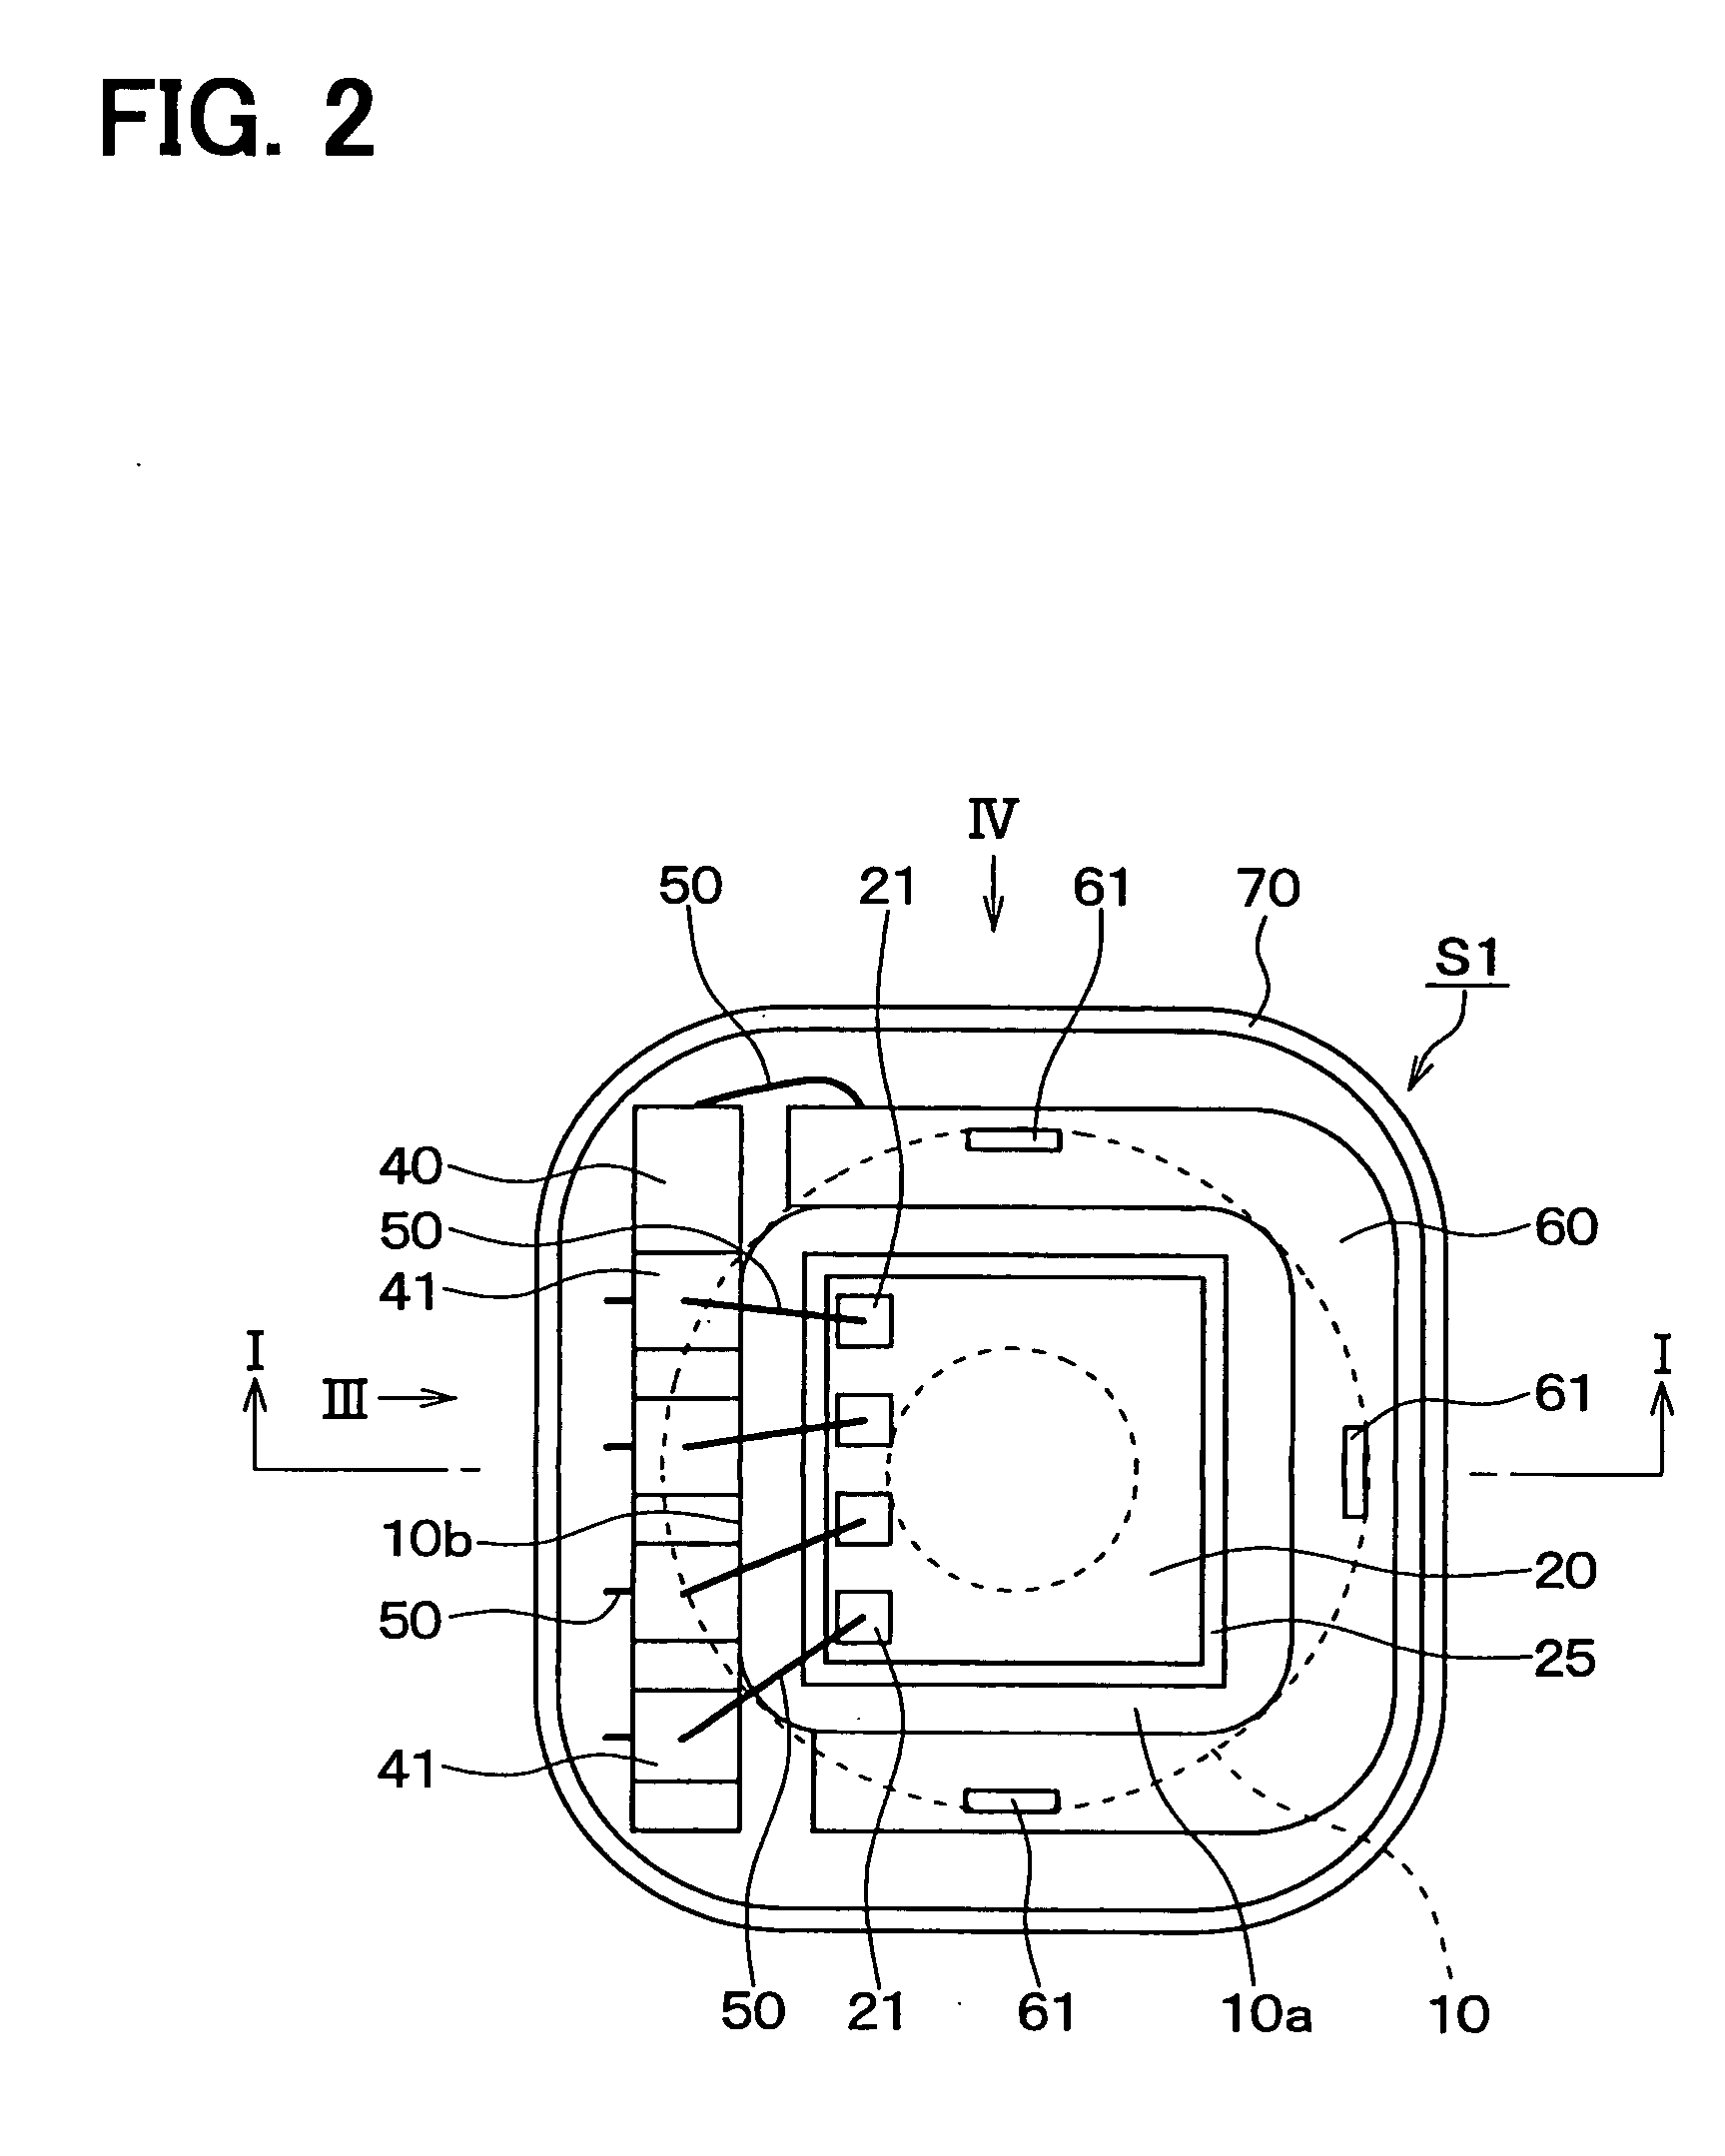 Pressure sensor having sensor chip and signal processing circuit mounted on a common stem